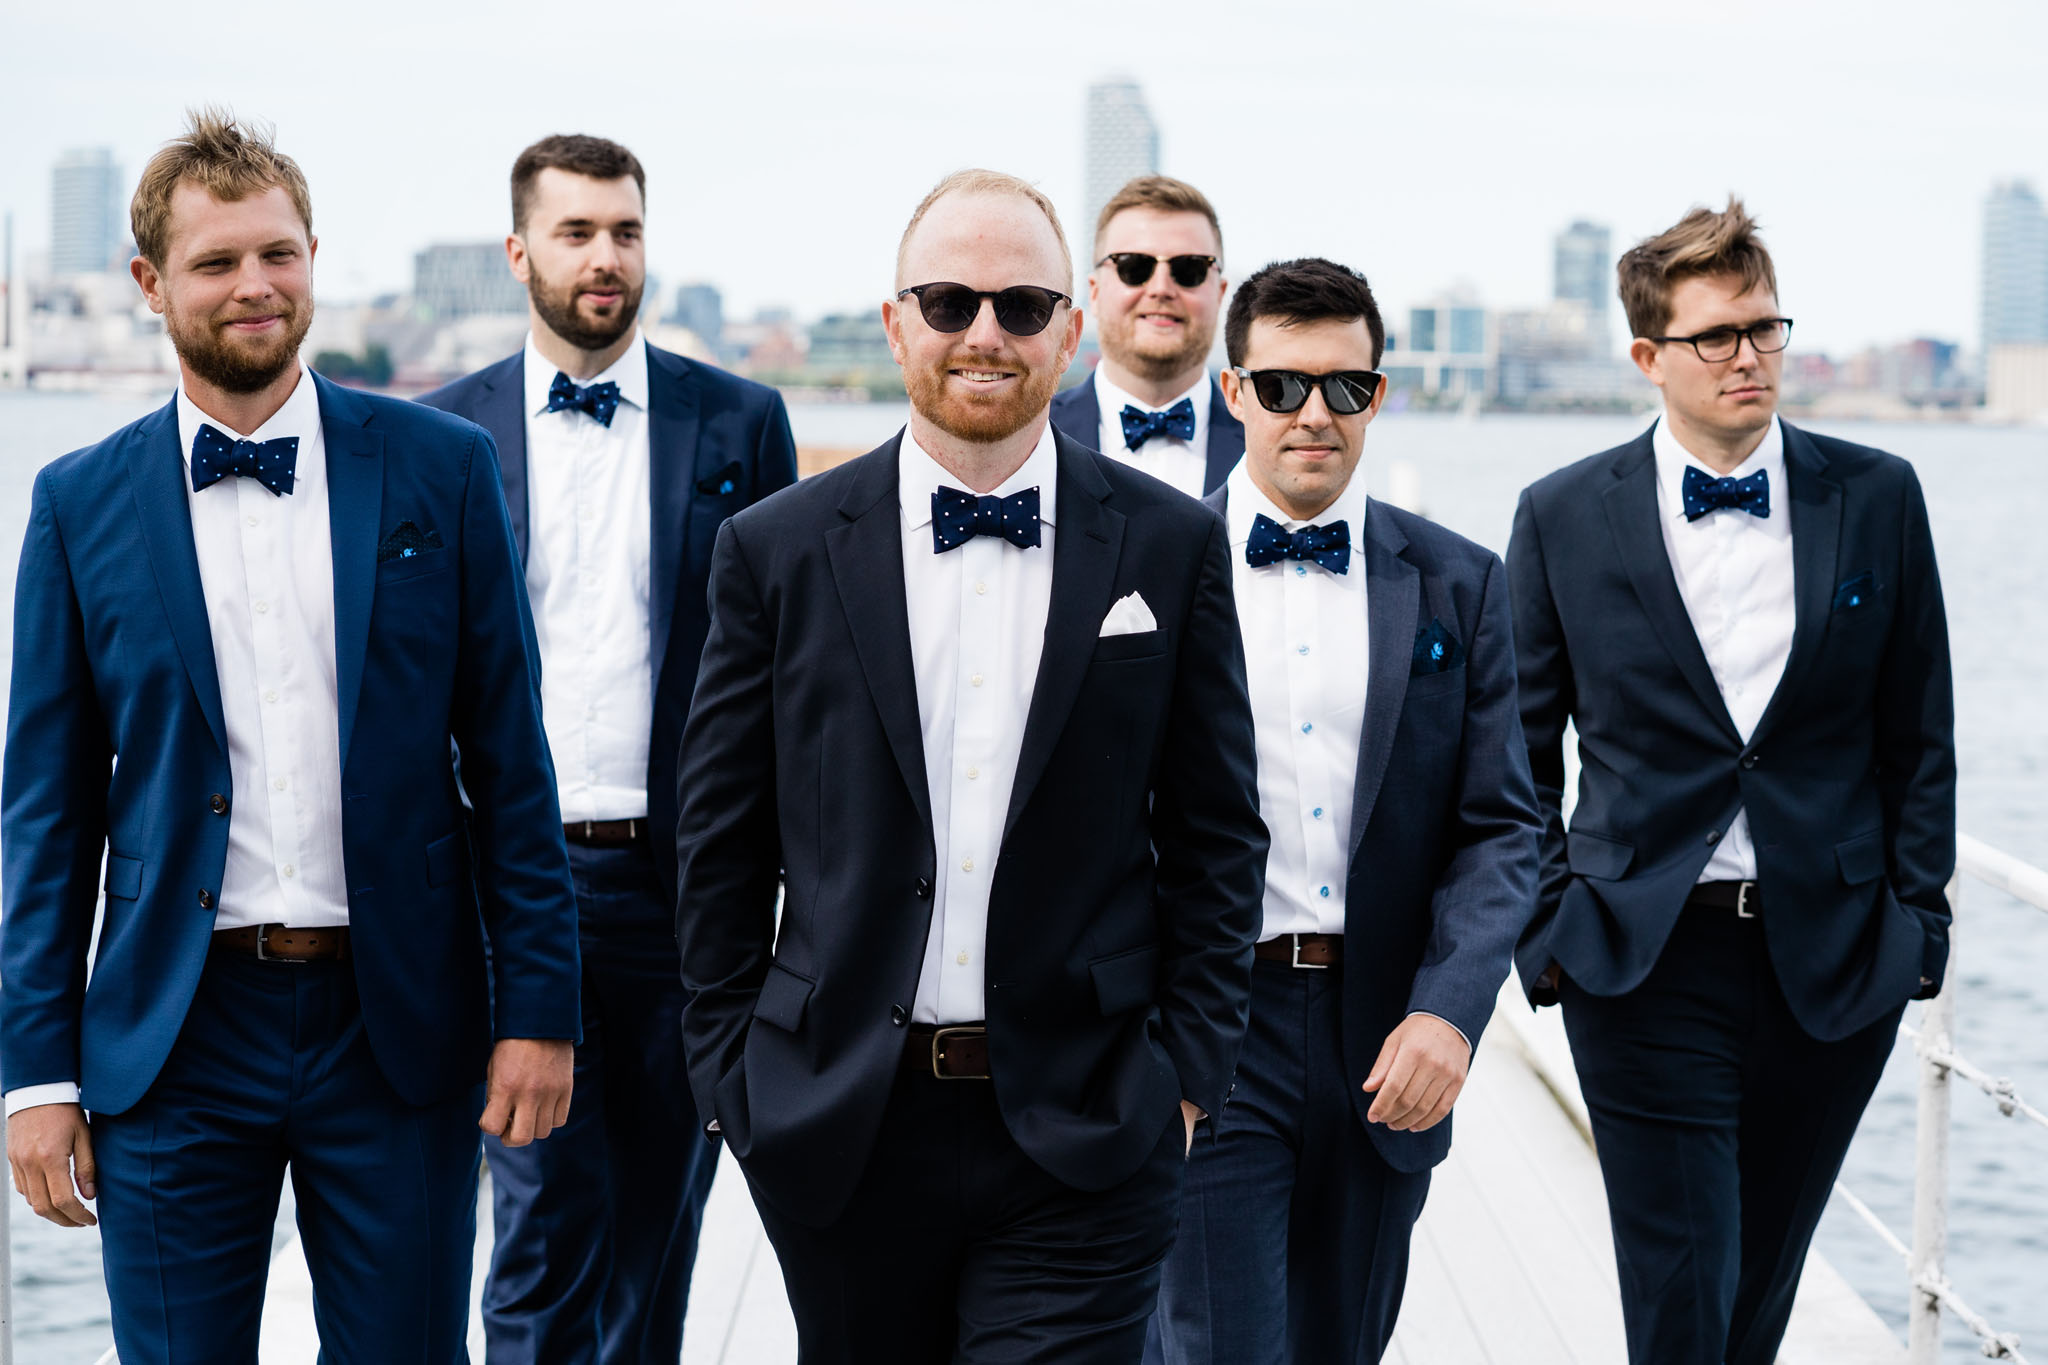 The groomsmen looking cool like Risky Business!